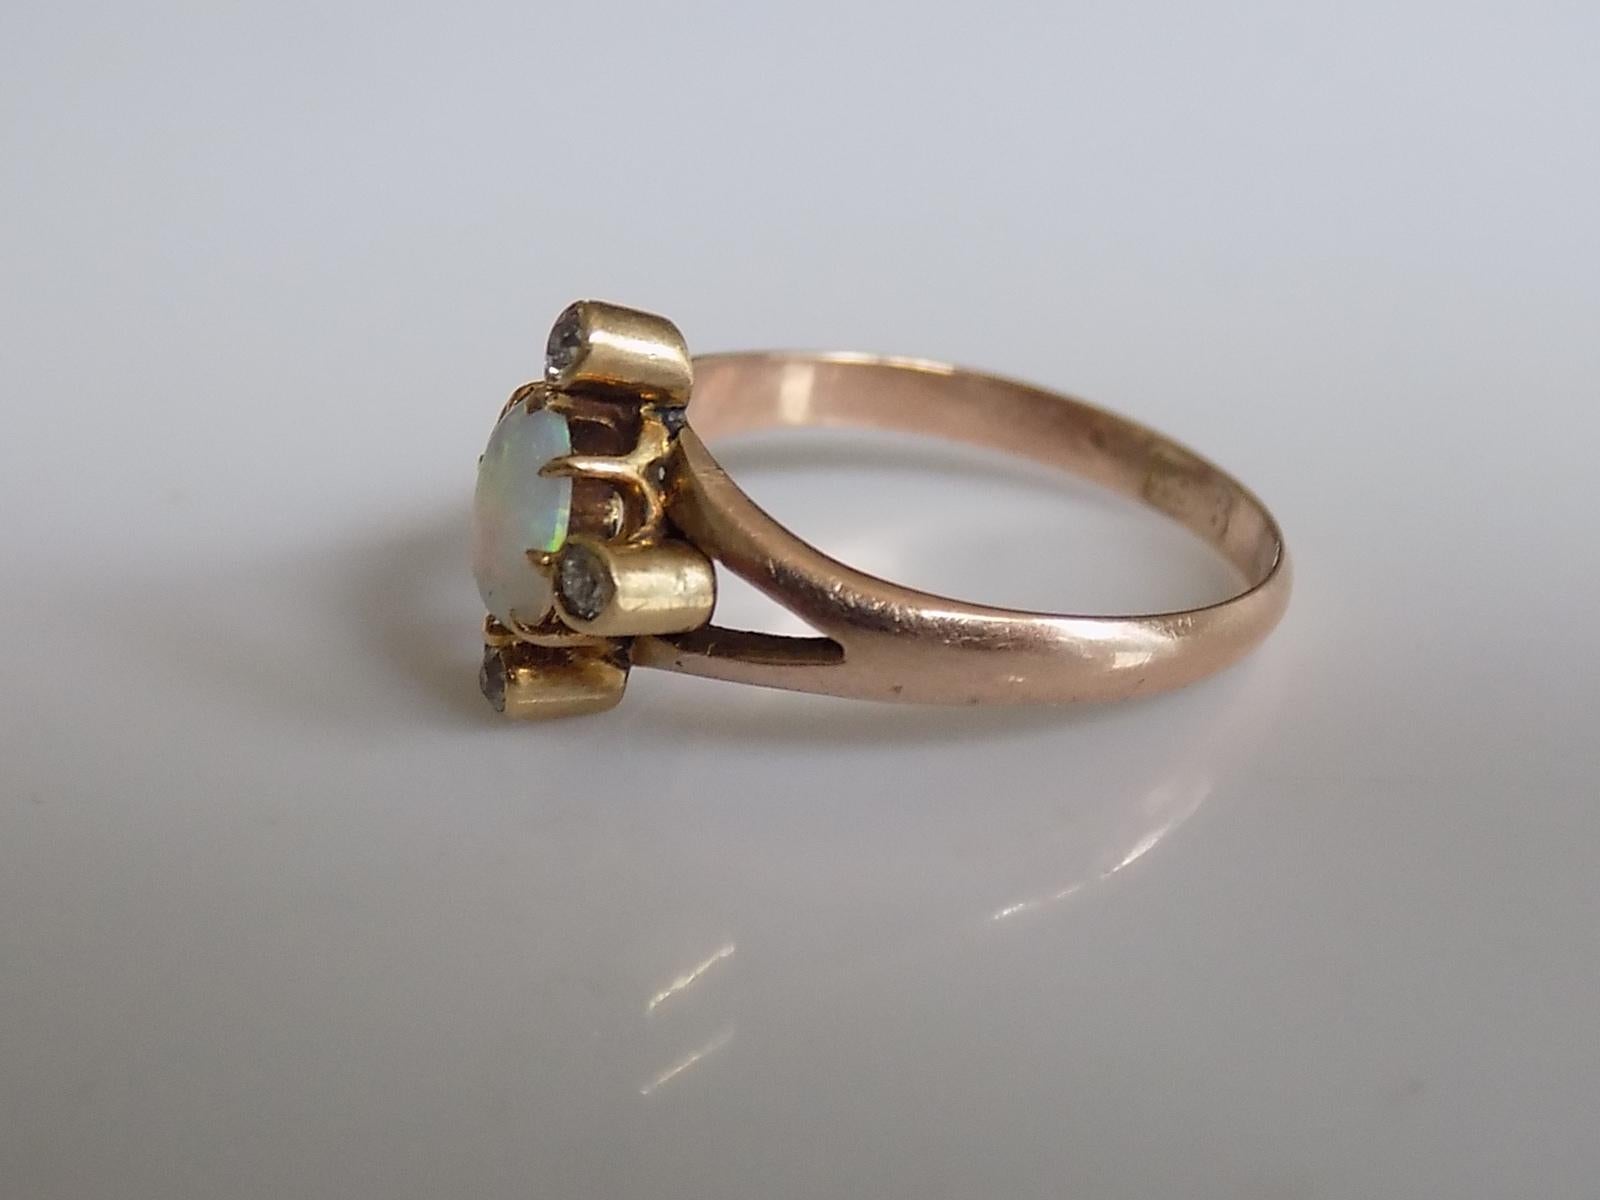 A Lovely Victorian 9 Carat Rose Gold, old cut Diamond and Opal ring. English origin.

Size L UK, 6 US.

Height of the face 12mm.
Weight 1.8gr.
The shank marked 9CT for 9 Carat Gold.

The ring in very good condition and ready to wear.